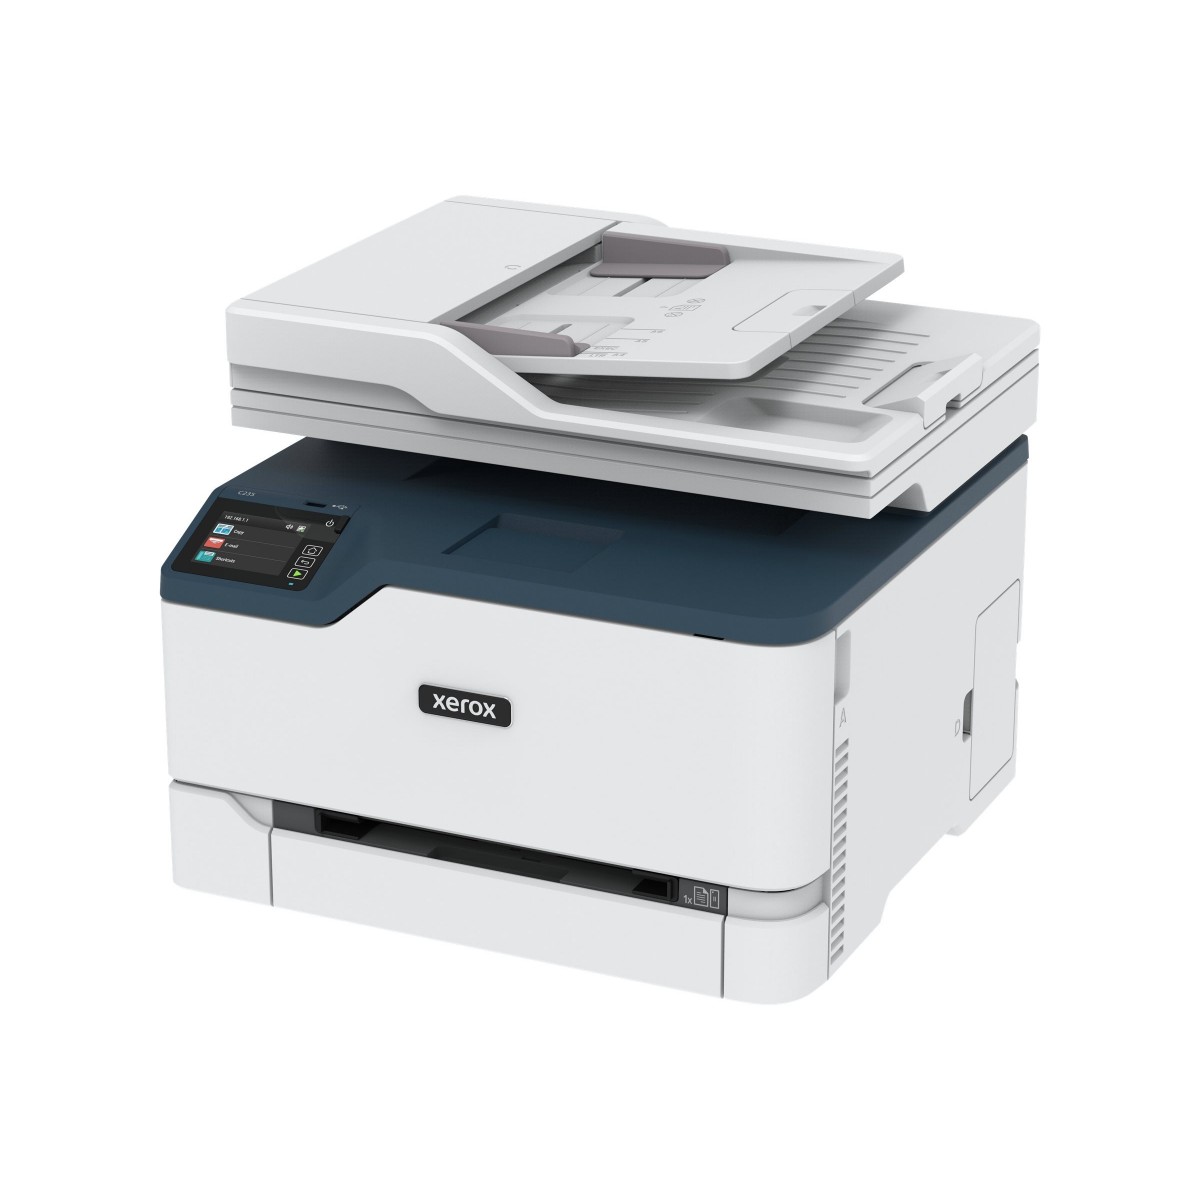 Xerox C235 A4 22ppm Wireless Copy/Print/Scan/Fax PS3 PCL5e/6 ADF 2 Trays Total 251 Sheets - Laser - Colour printing - 600 x 600 